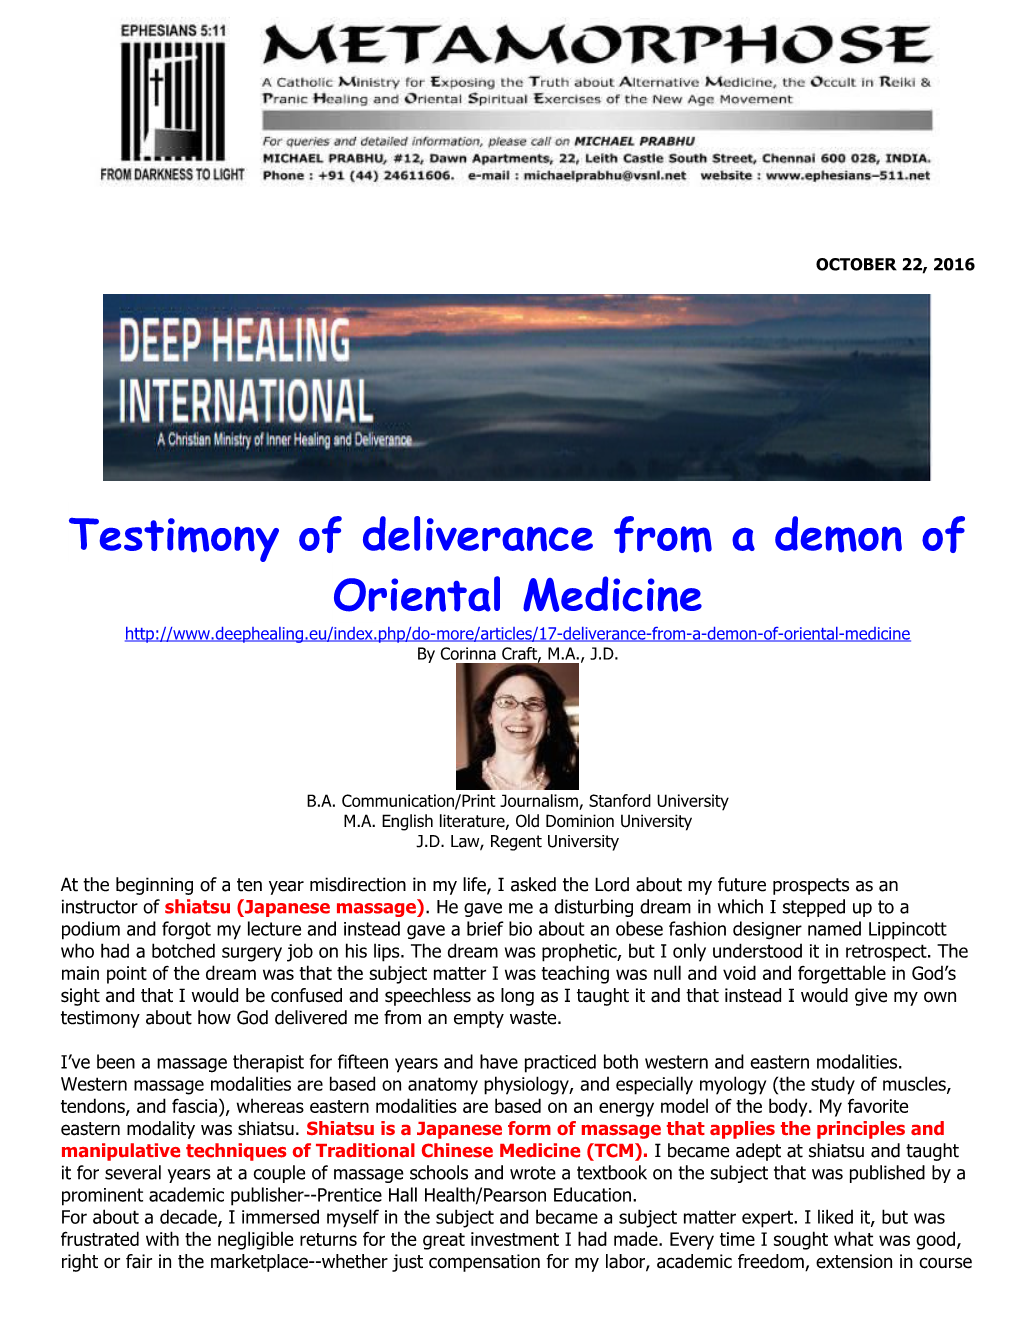 Testimony of Deliverance from a Demon of Oriental Medicine